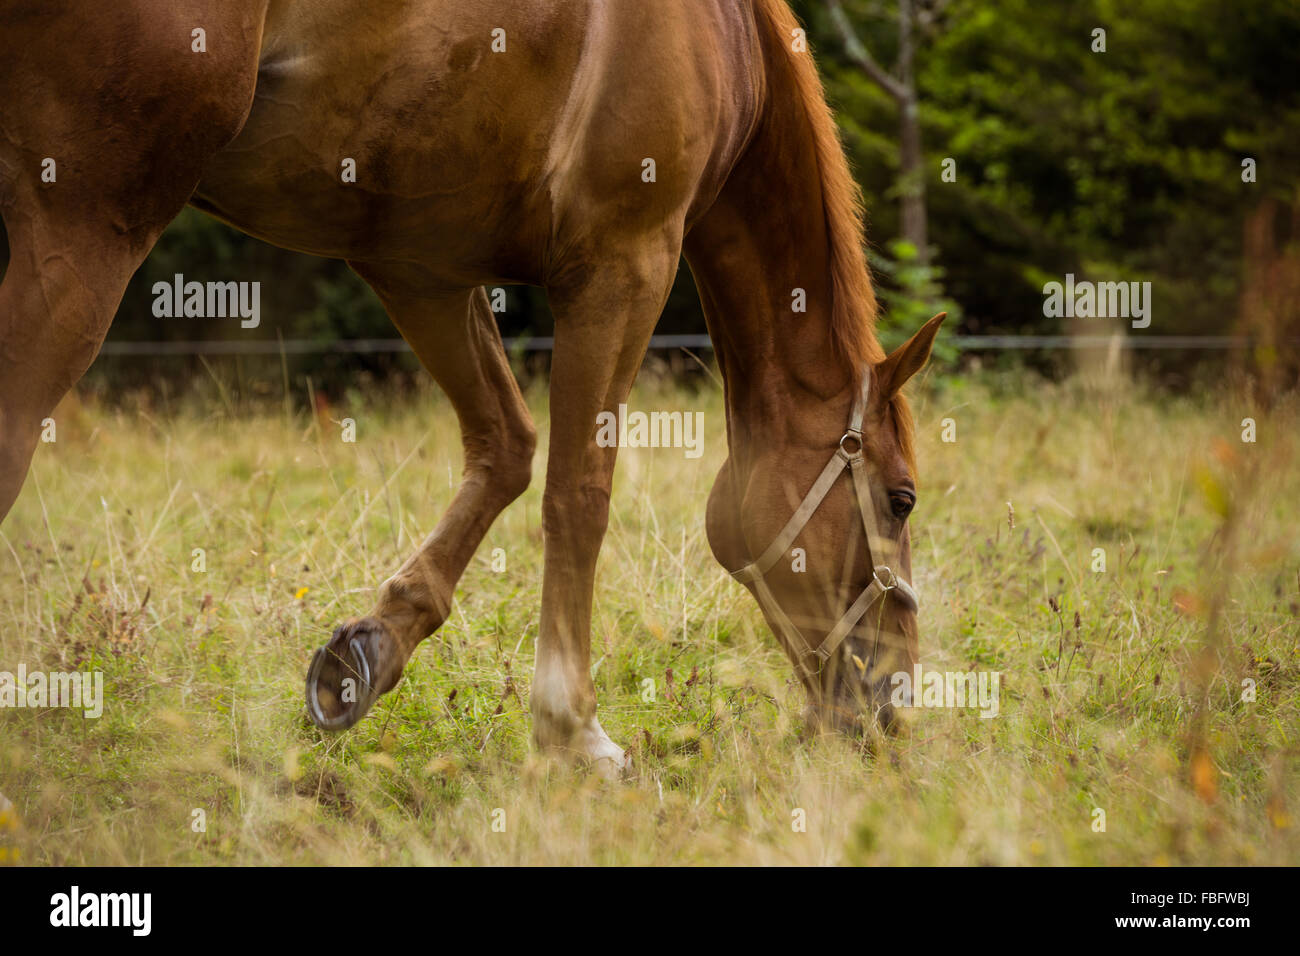 Side view of thorough bred horse Stock Photo